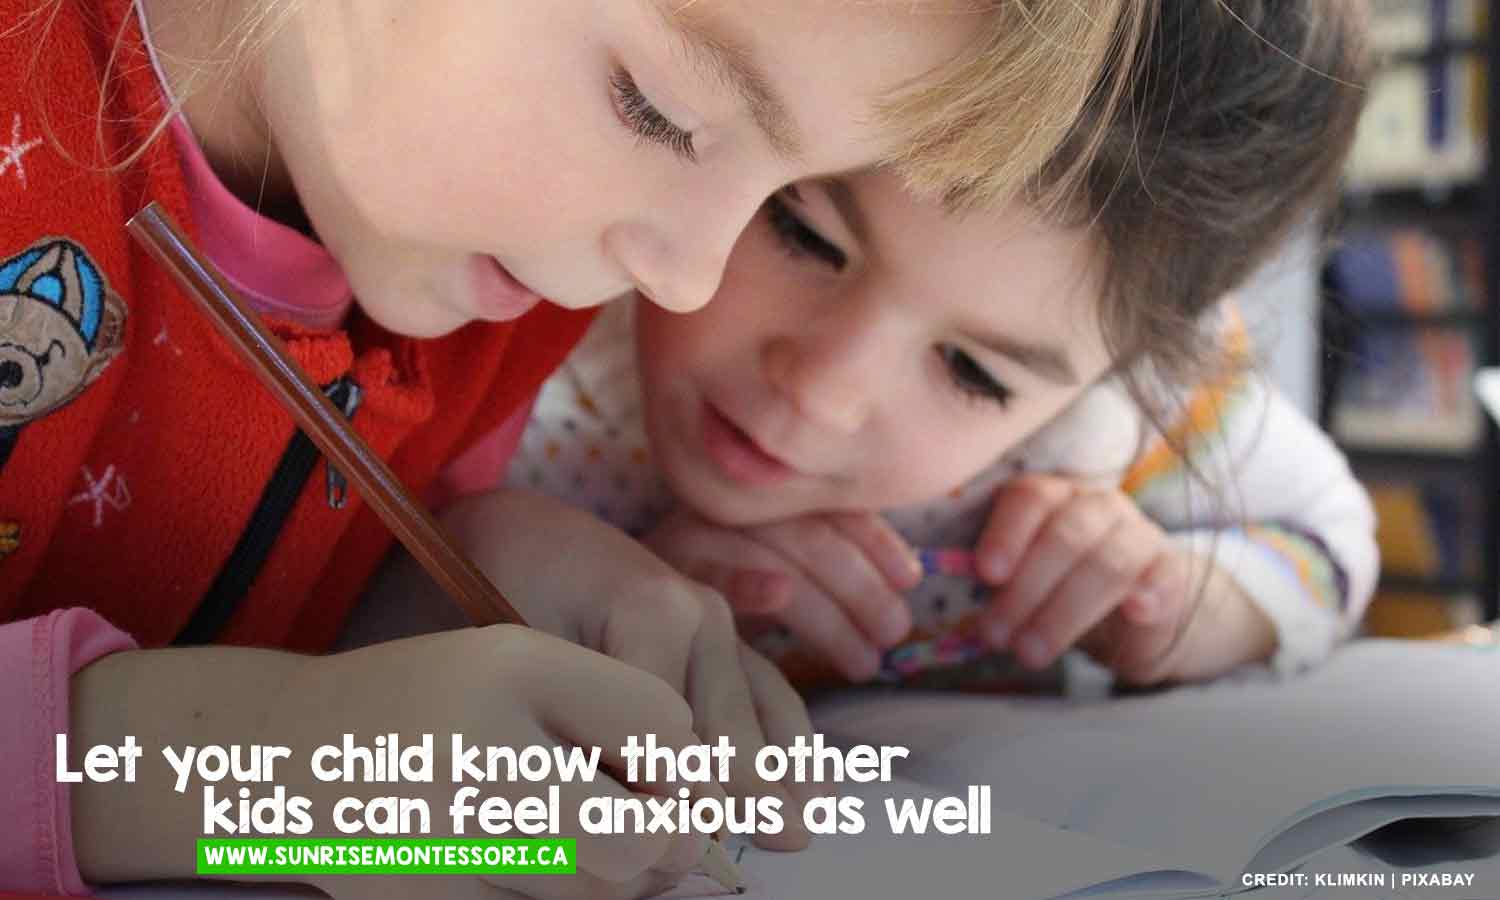 Let your child know that other kids can feel anxious as well